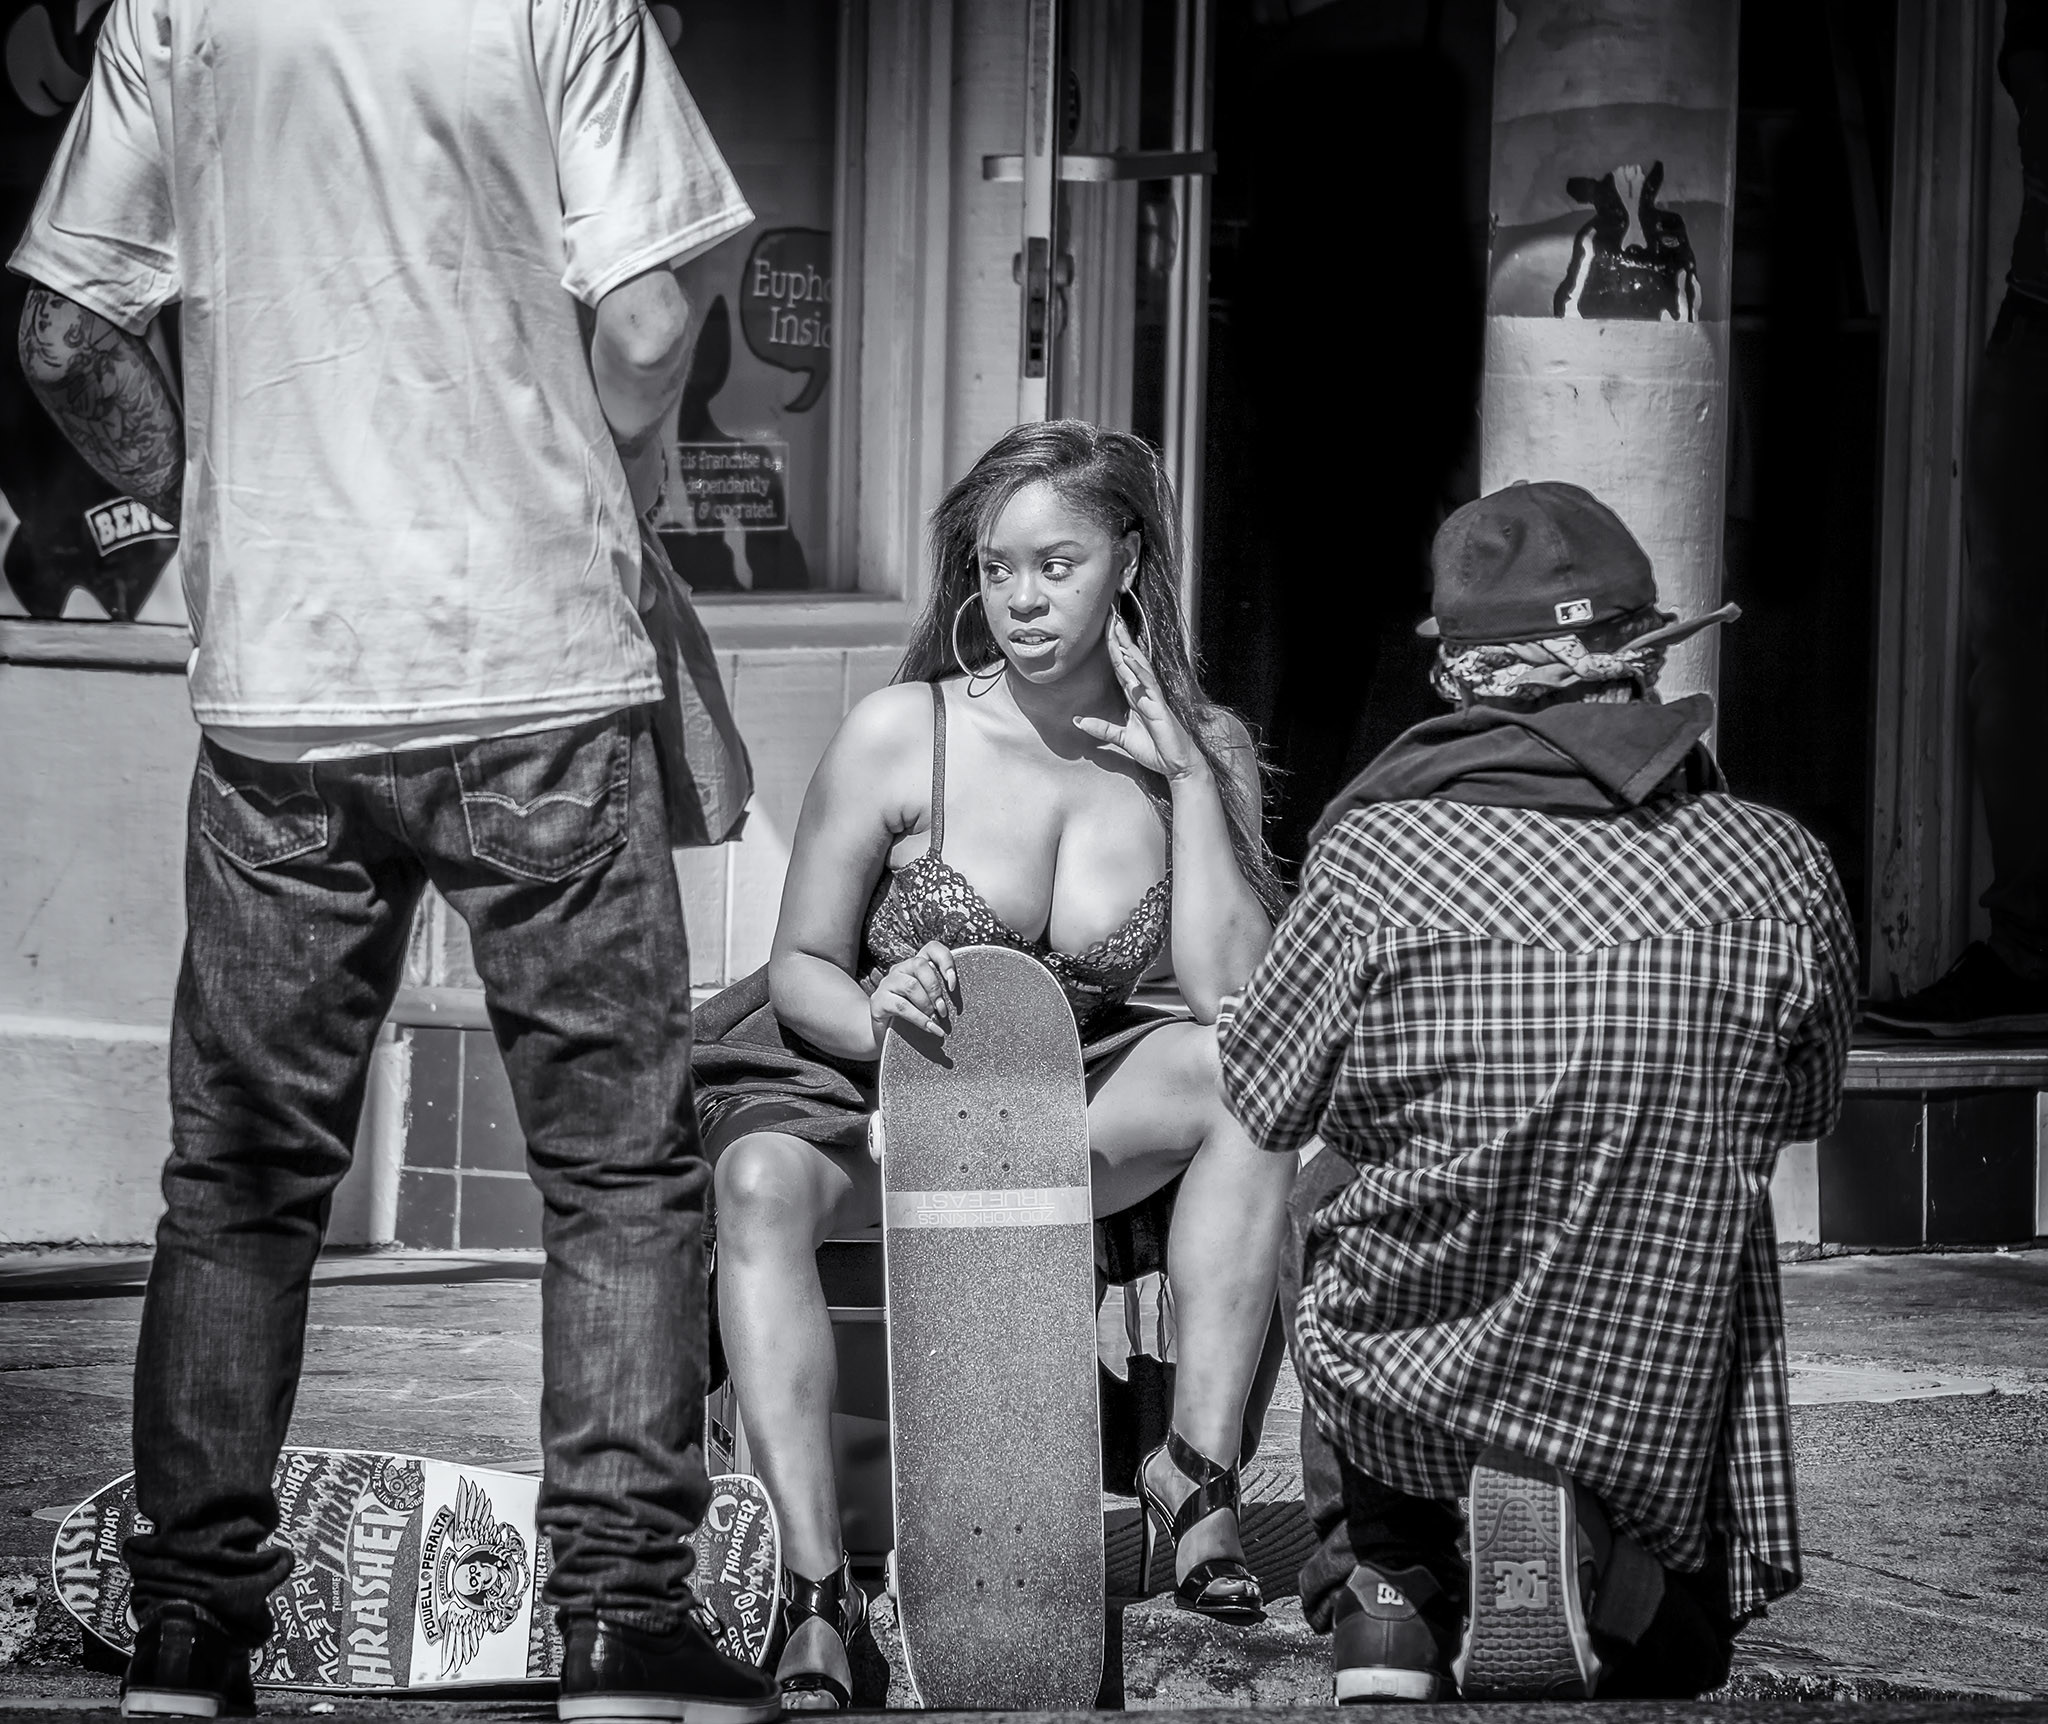 Woman holds skateboard while seated, flanked by two men in San Francisco's Haight Ashbury district.